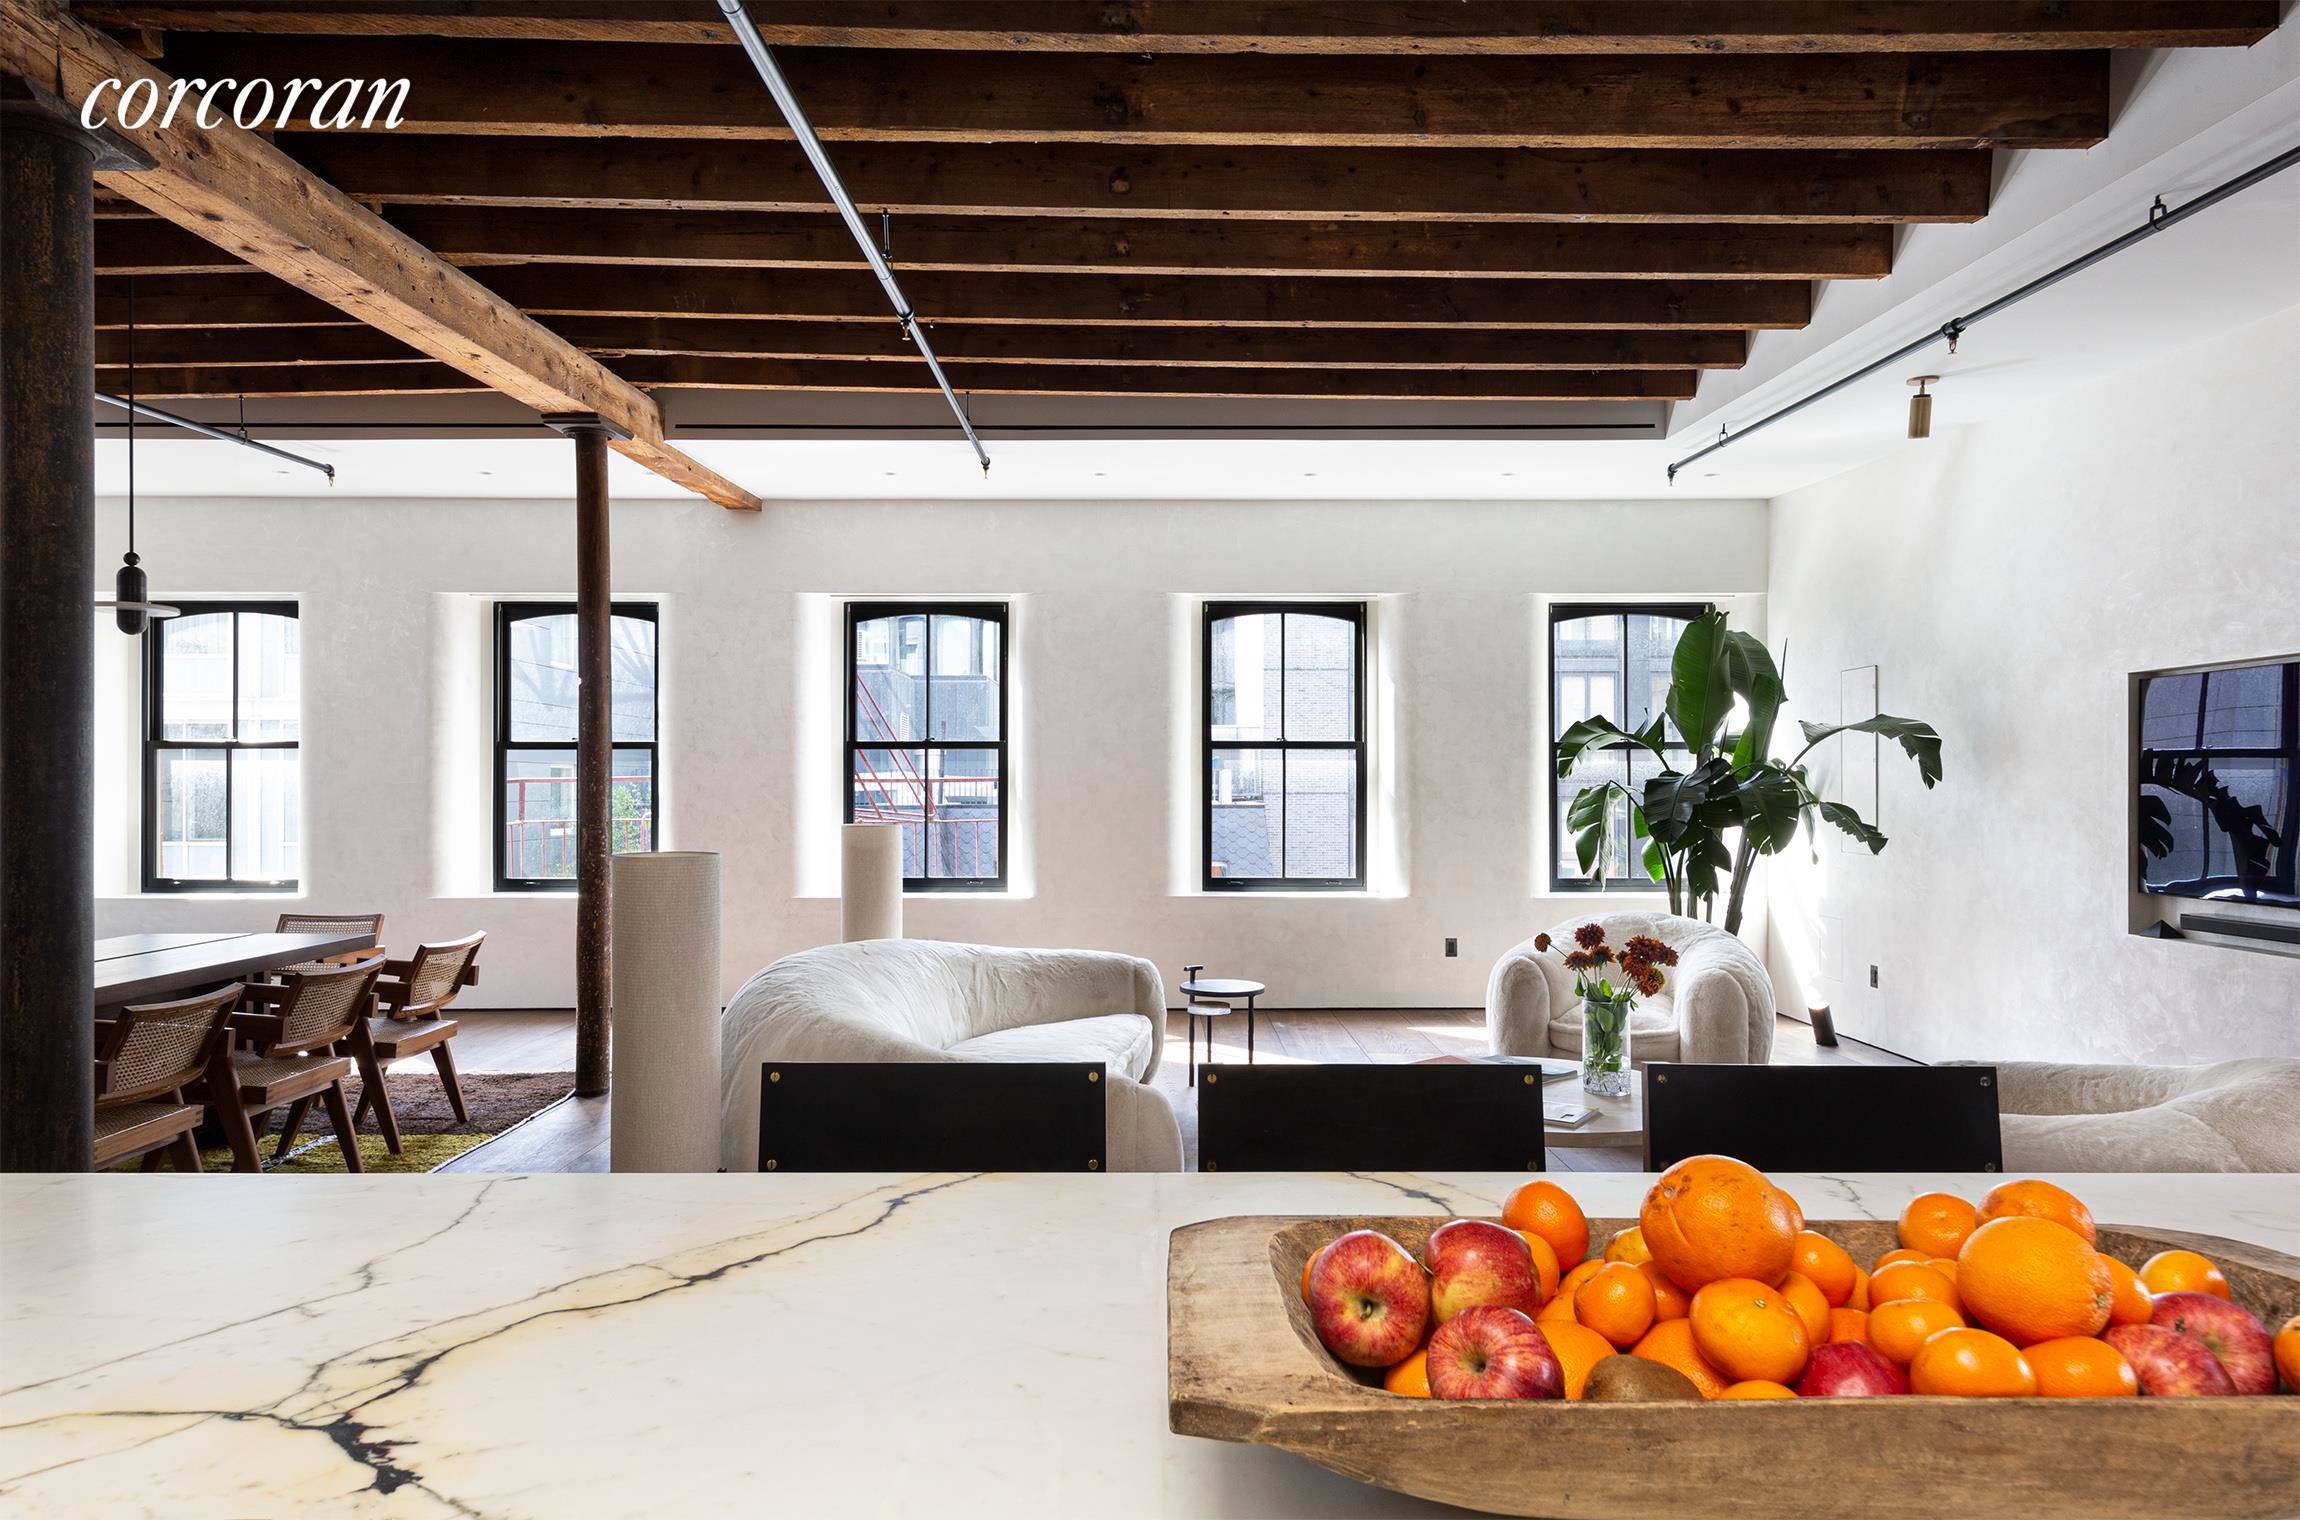 Fresh off a 2 year, multi million dollar gut renovation and recently featured by Architectural Digest, this triple mint, three bed, three and a half bath penthouse loft offers an ...